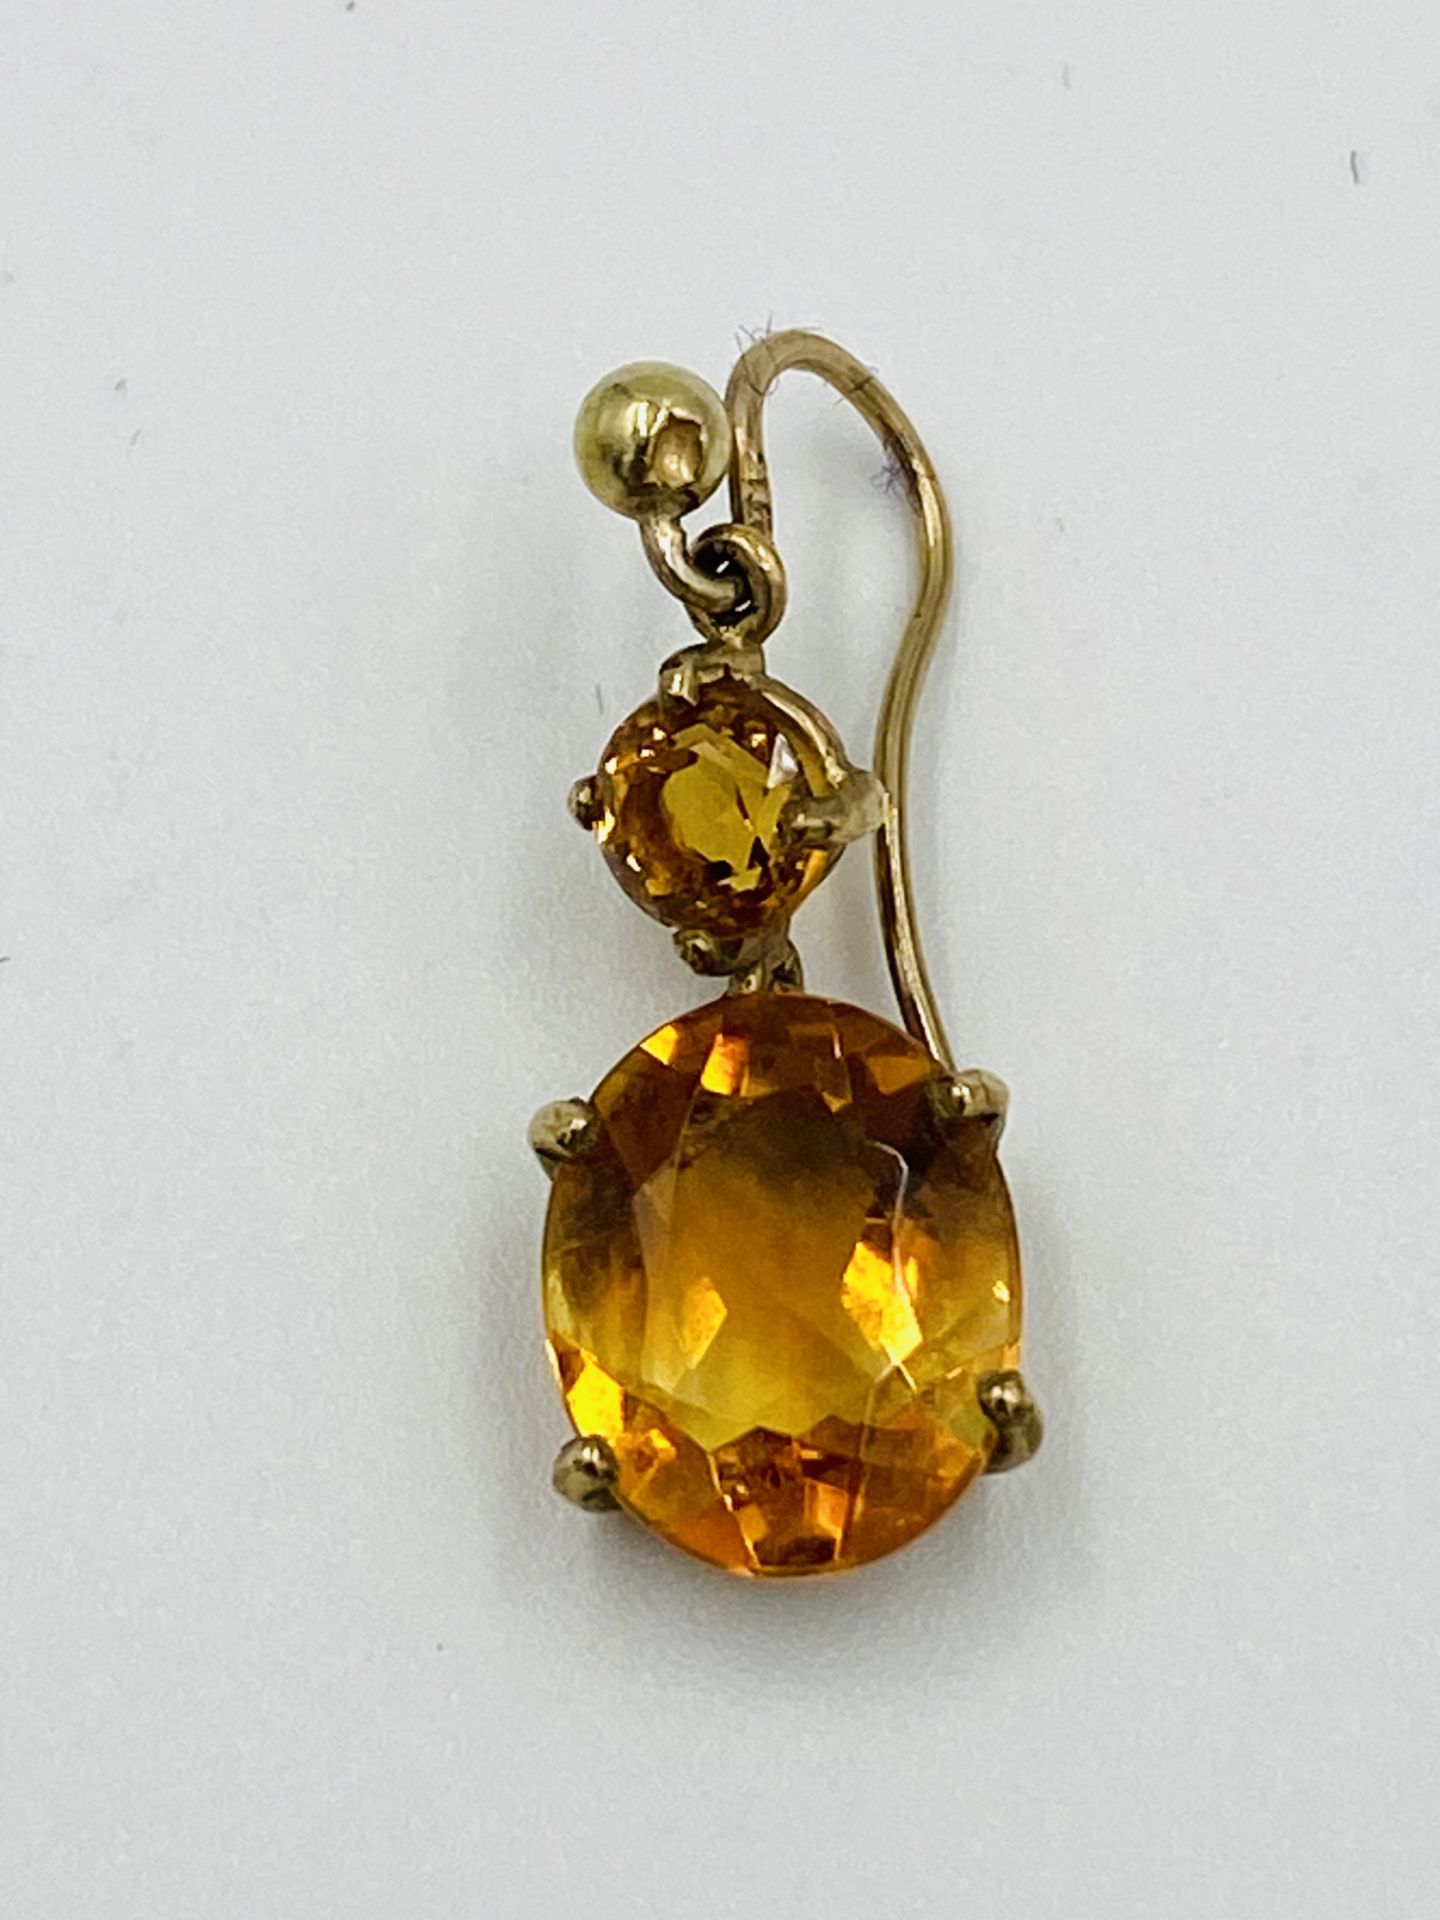 Pair of 9ct gold and citrine earrings - Image 3 of 3